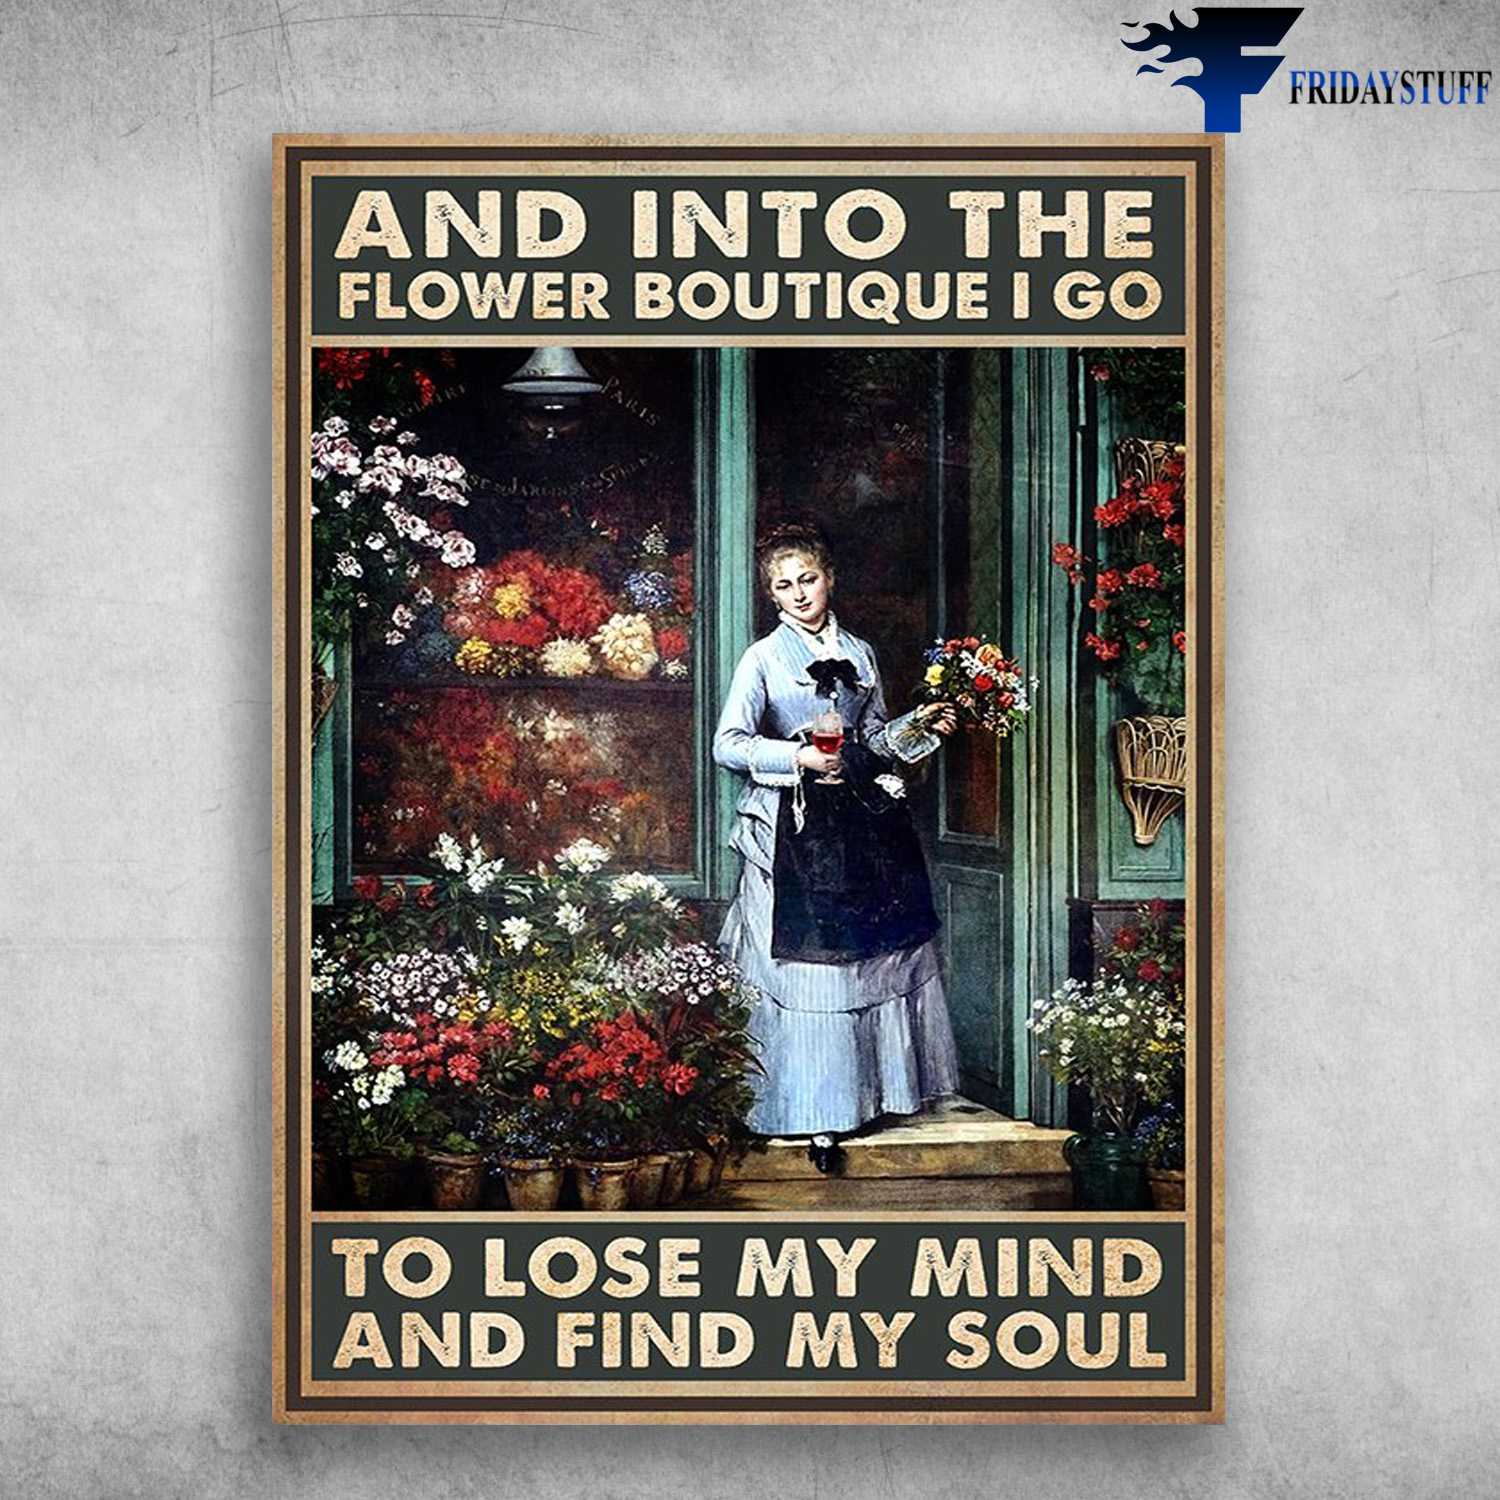 Flower Shop, Flower And Wine - And Intp The Flower Boutique, I Go To Lose My Mind And Find My Soul